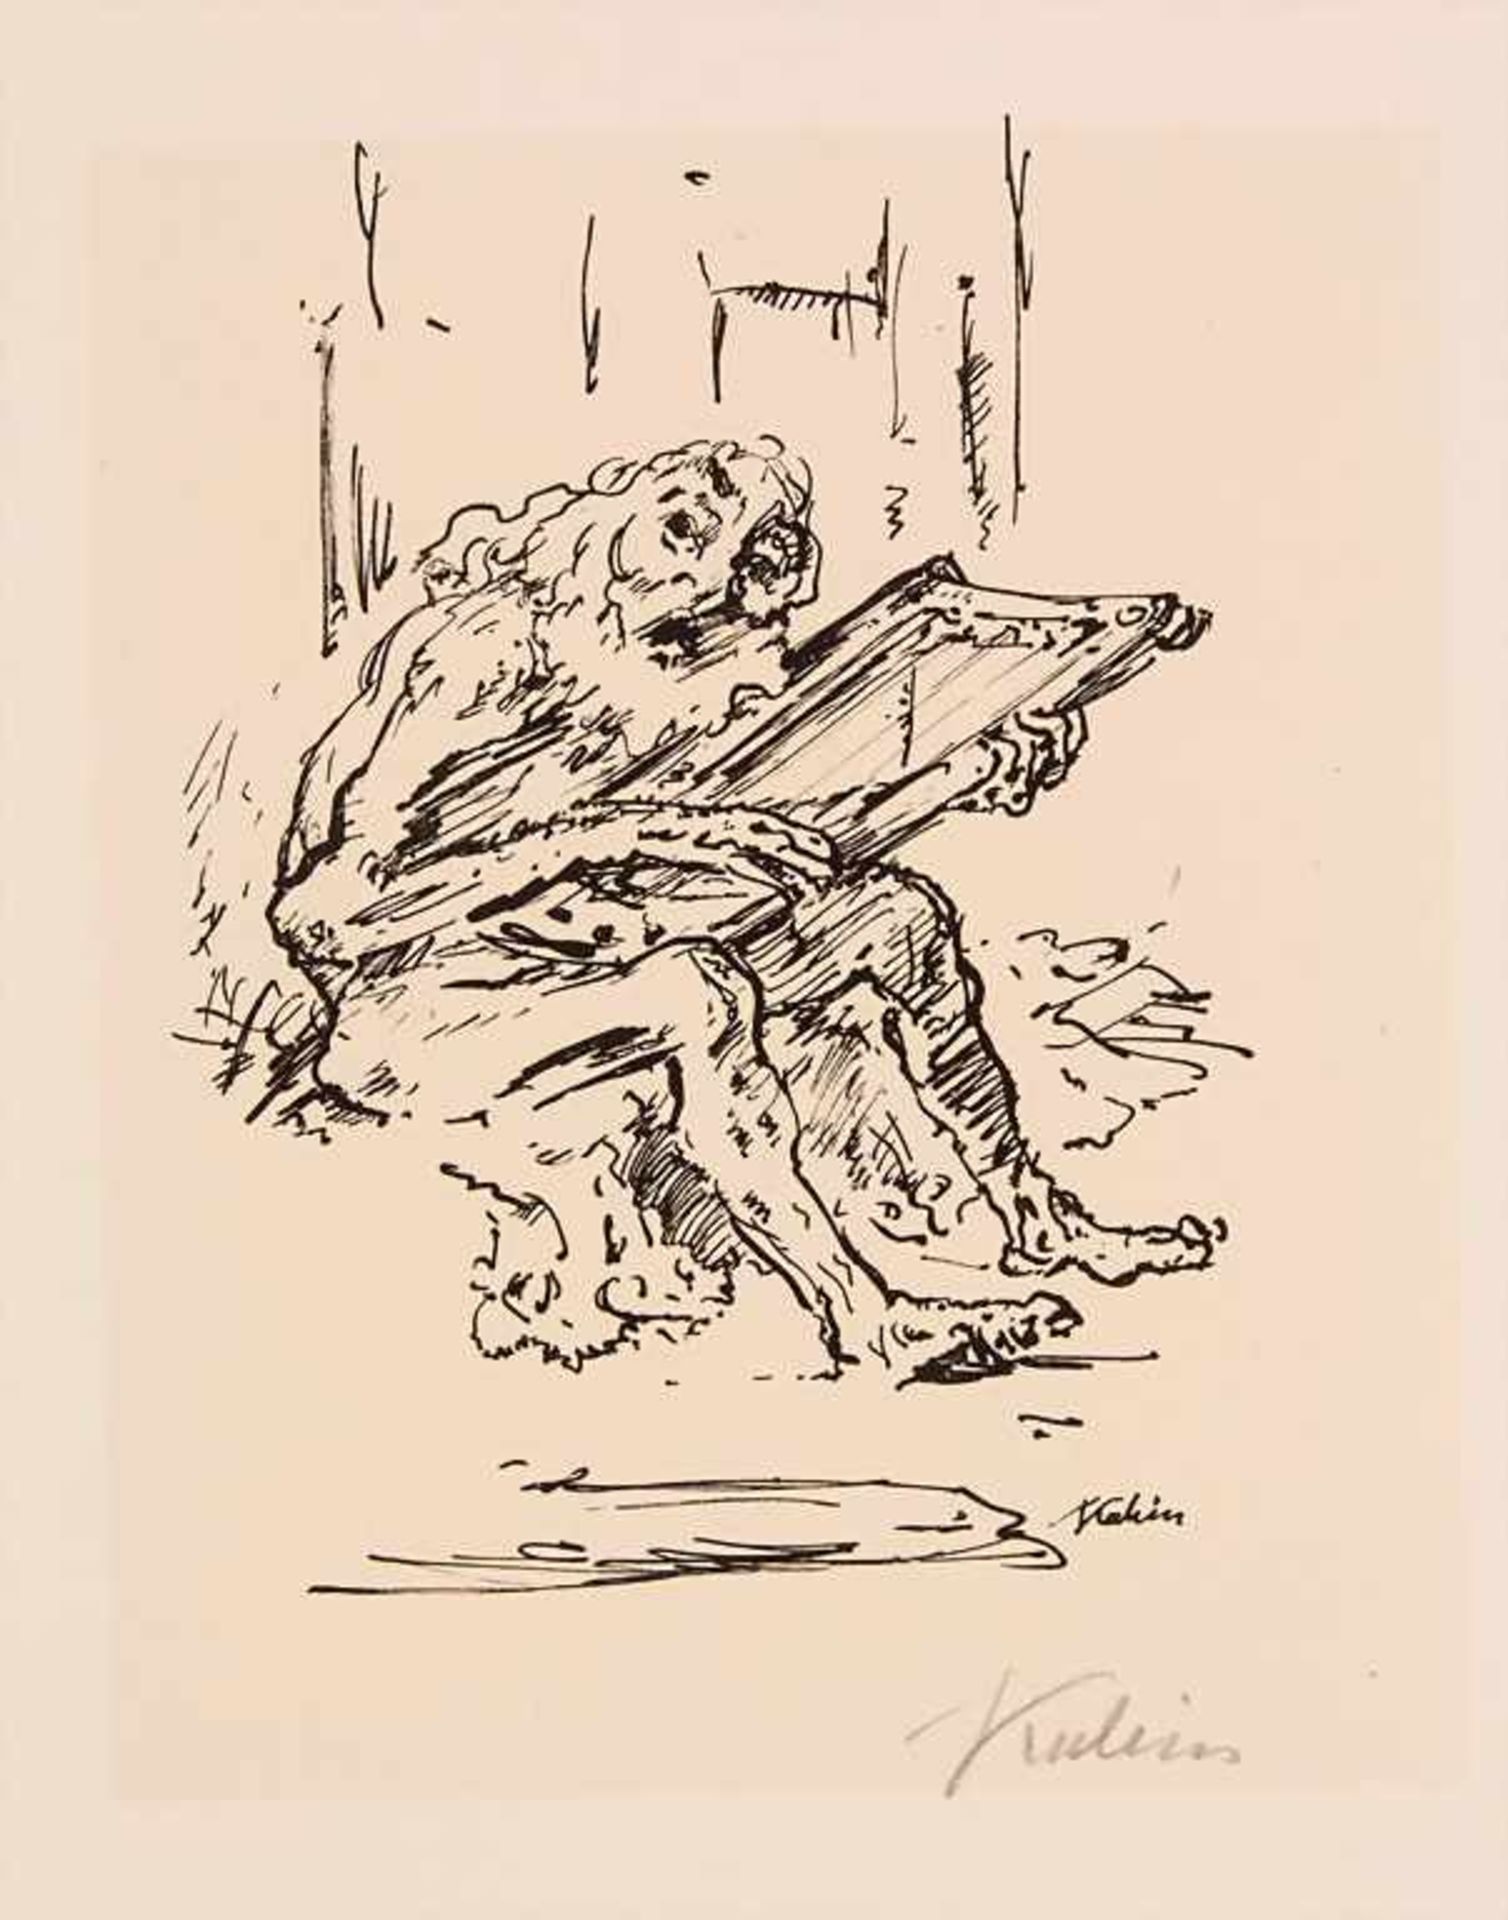 Alfred Kubin (1877-1959), 'Bärtiger mit Zither' / 'A bearded man playing a zither'